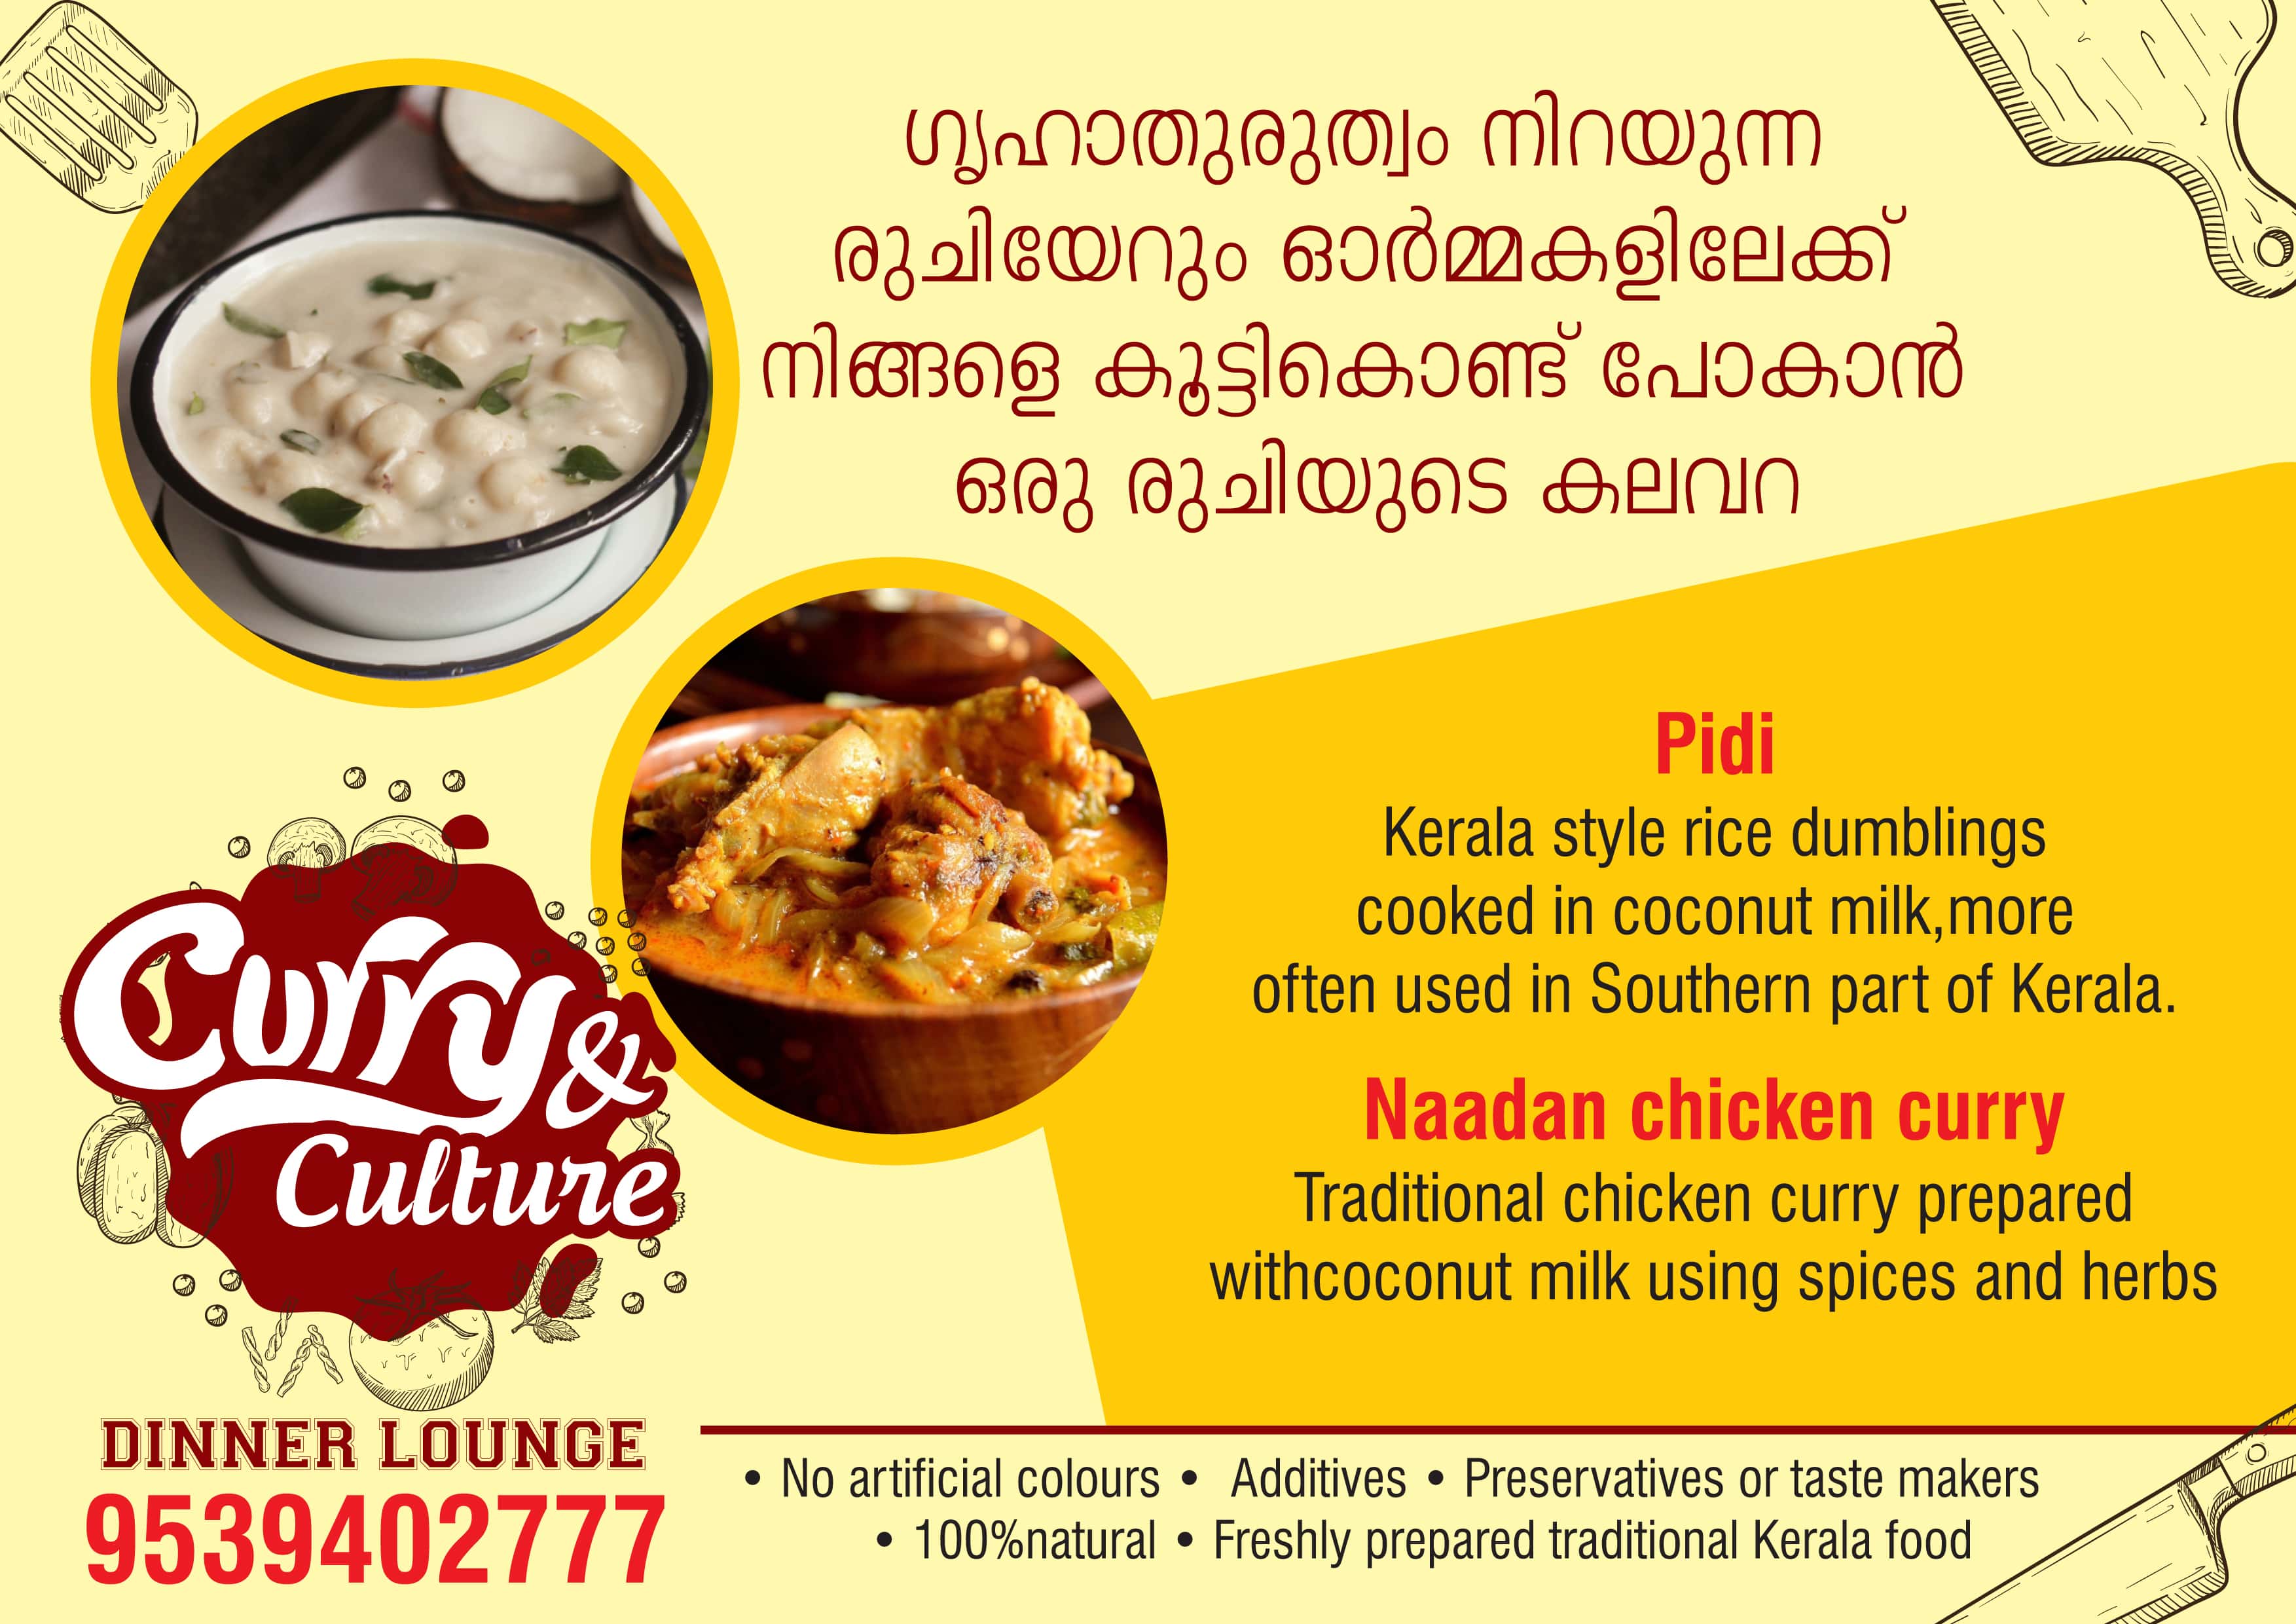 Curry & Culture_pidi_chicken curry